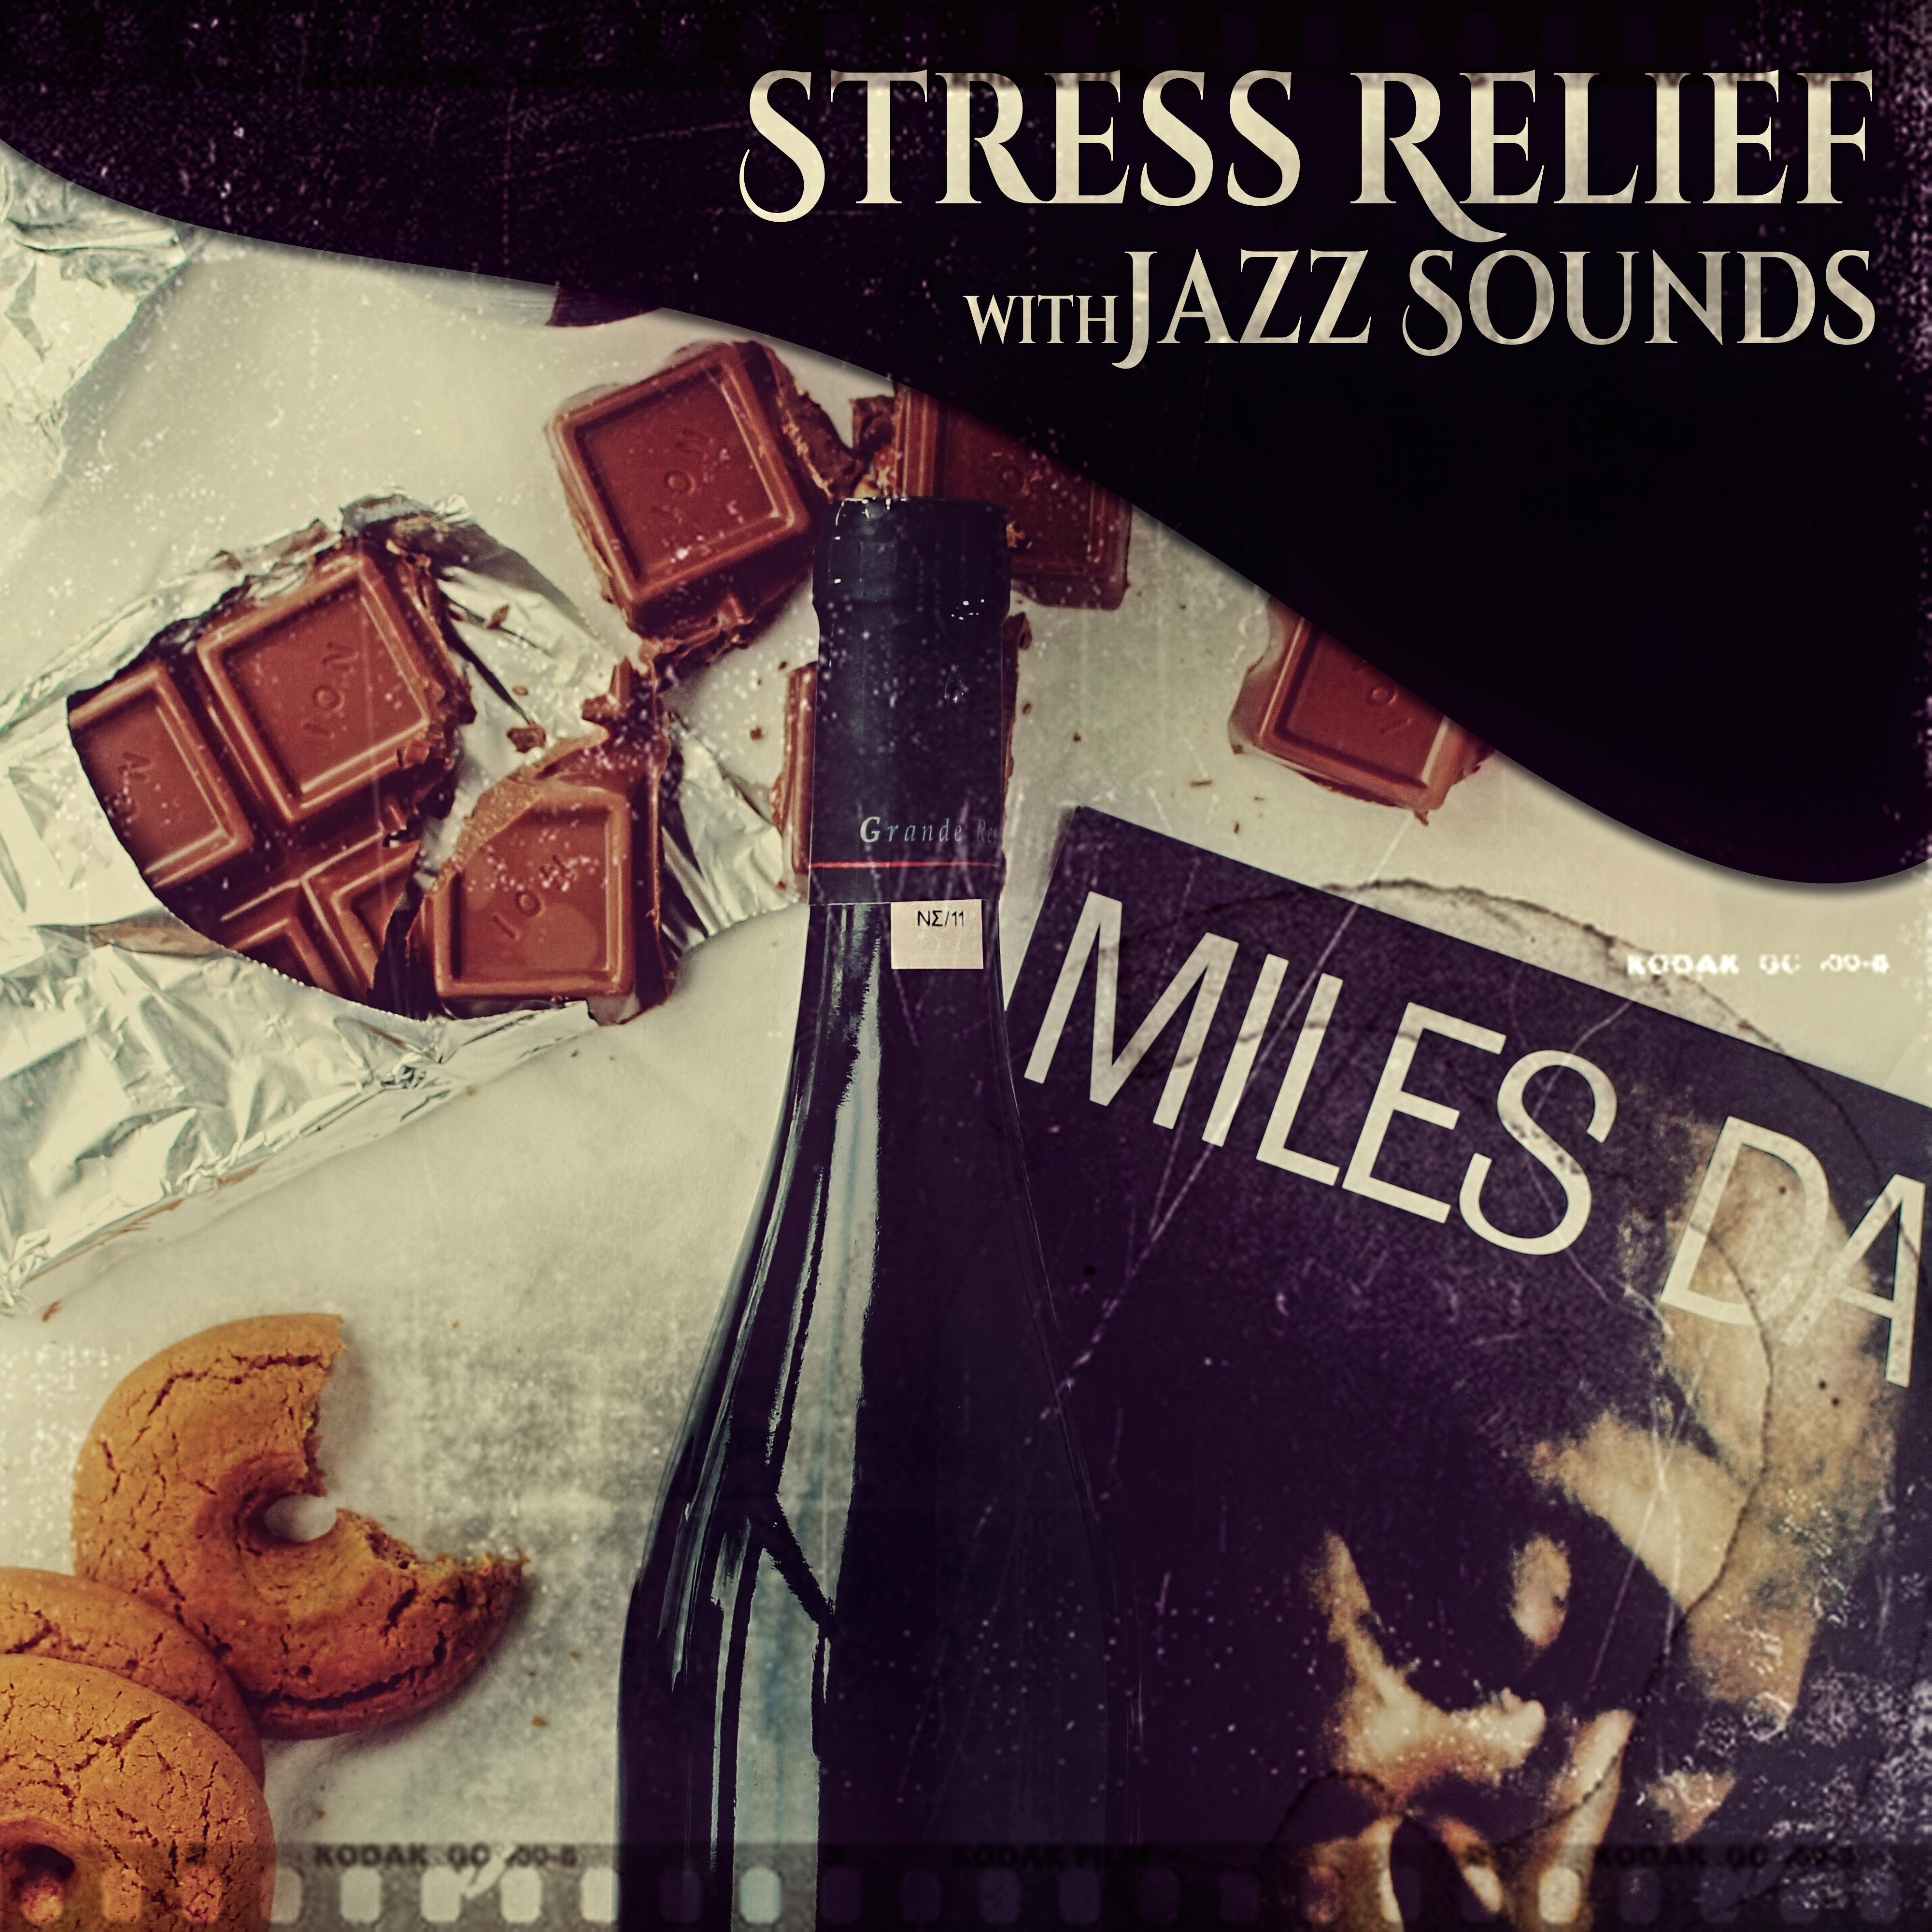 Stress Relief with Jazz Sounds – Best Relaxing Jazz Music, Soft Sounds to Calm Down, Peaceful Mind